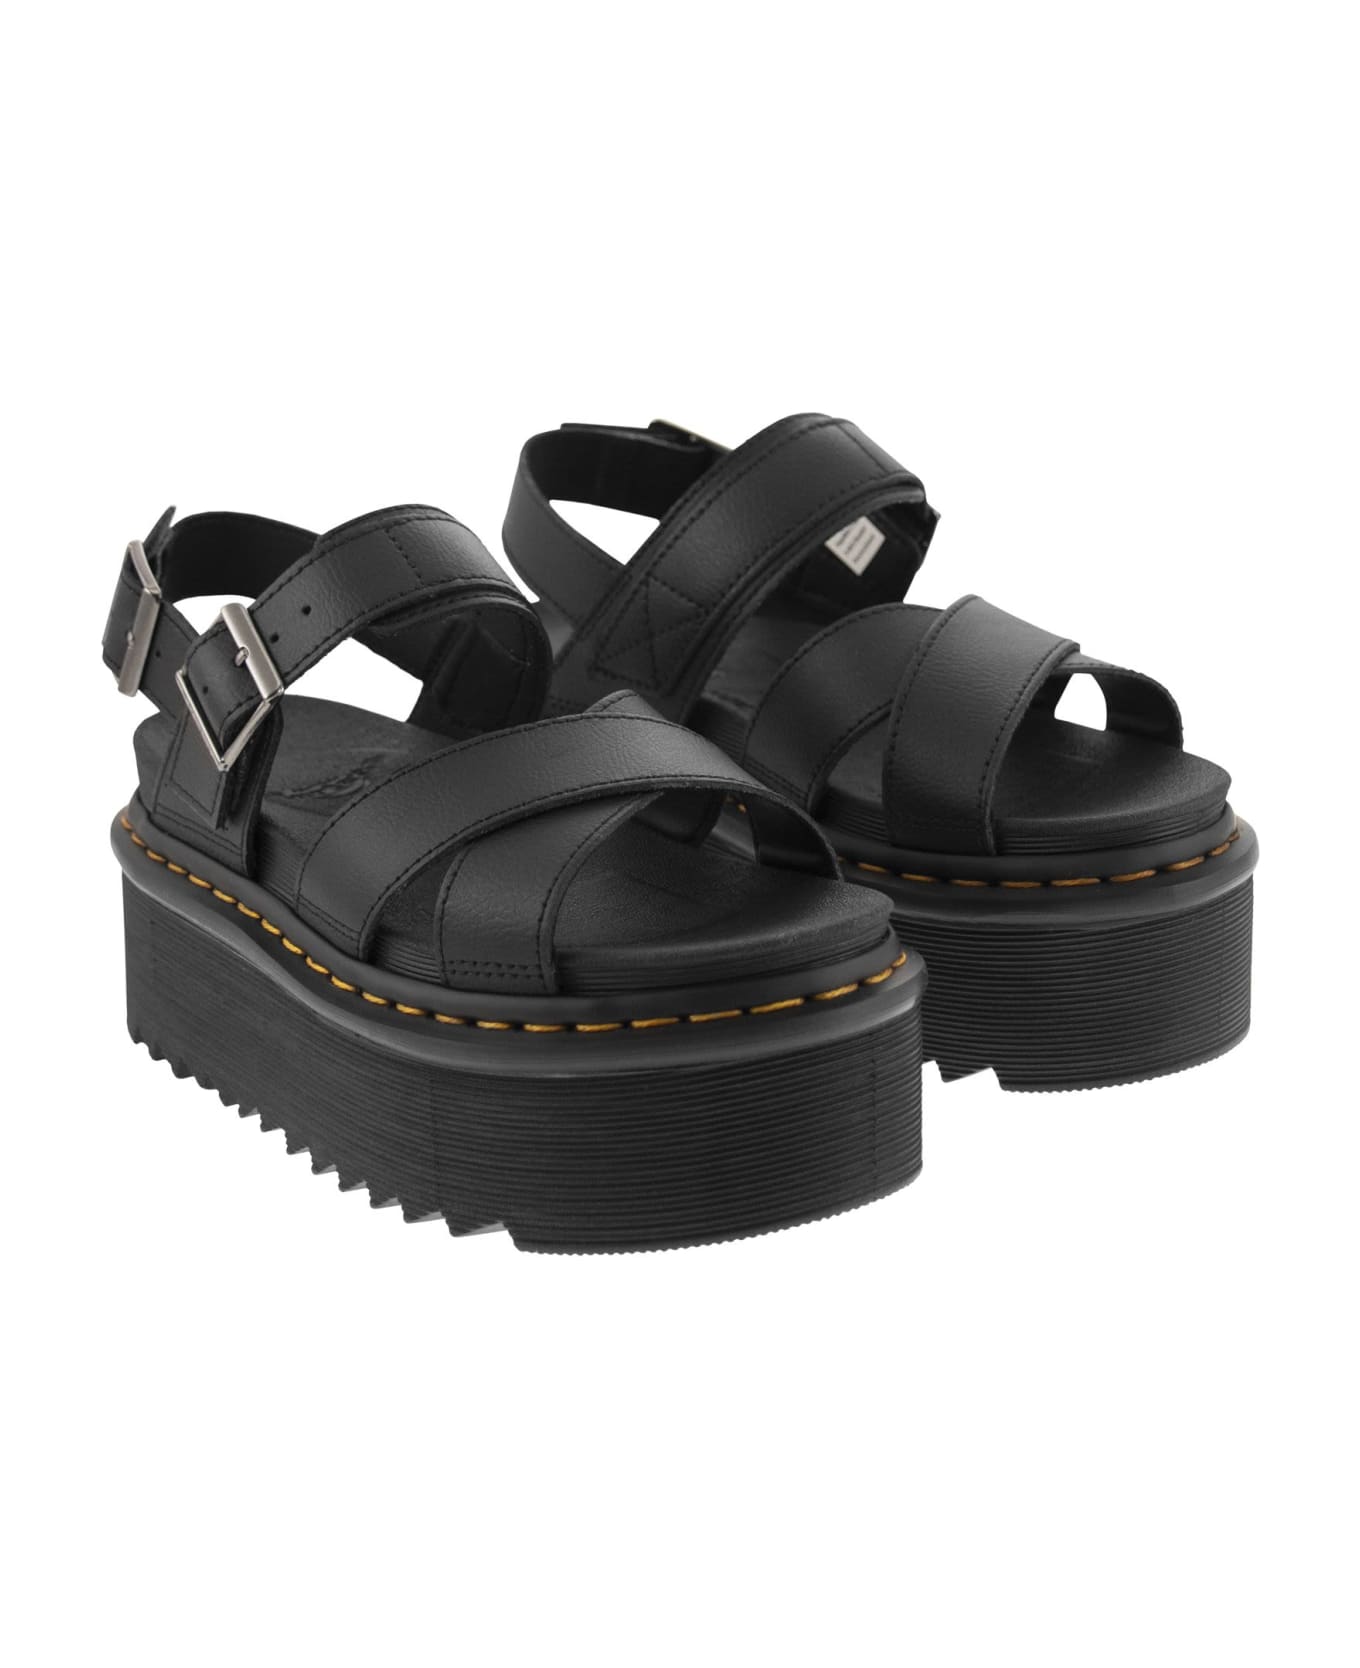 Dr. Martens Voss Ii Leather Sandals With Straps - Black